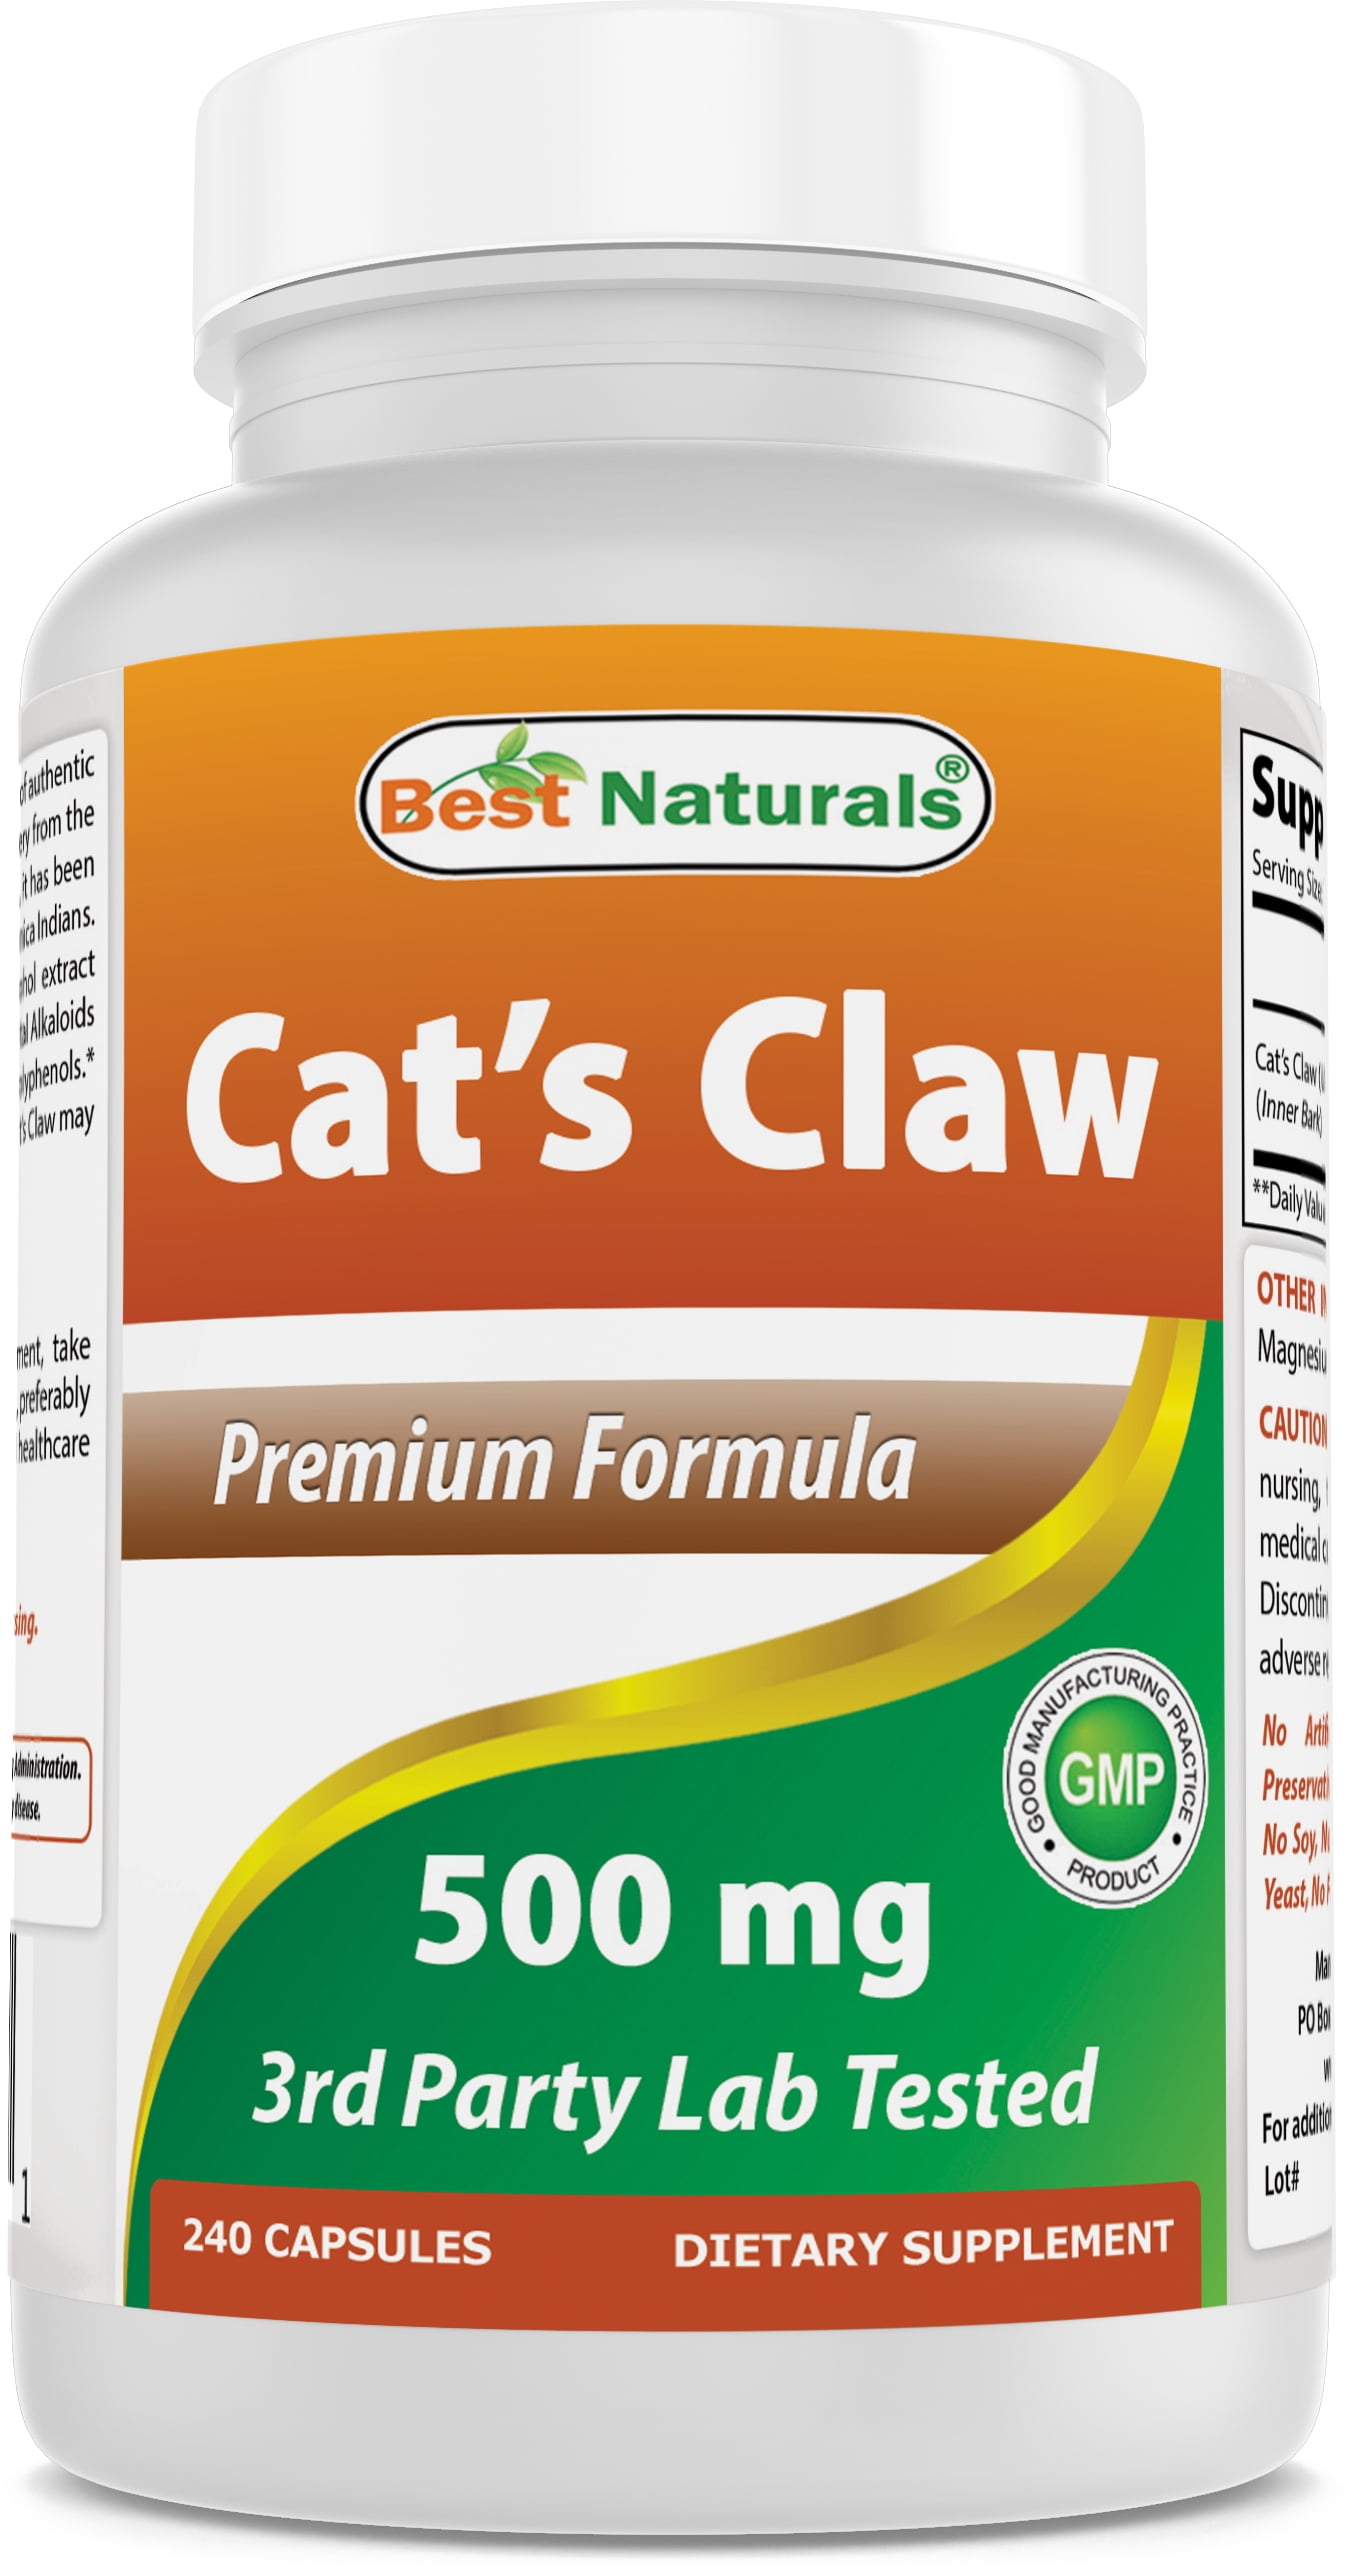 Best Naturals Cat's Claw 500 mg 240 Capsules